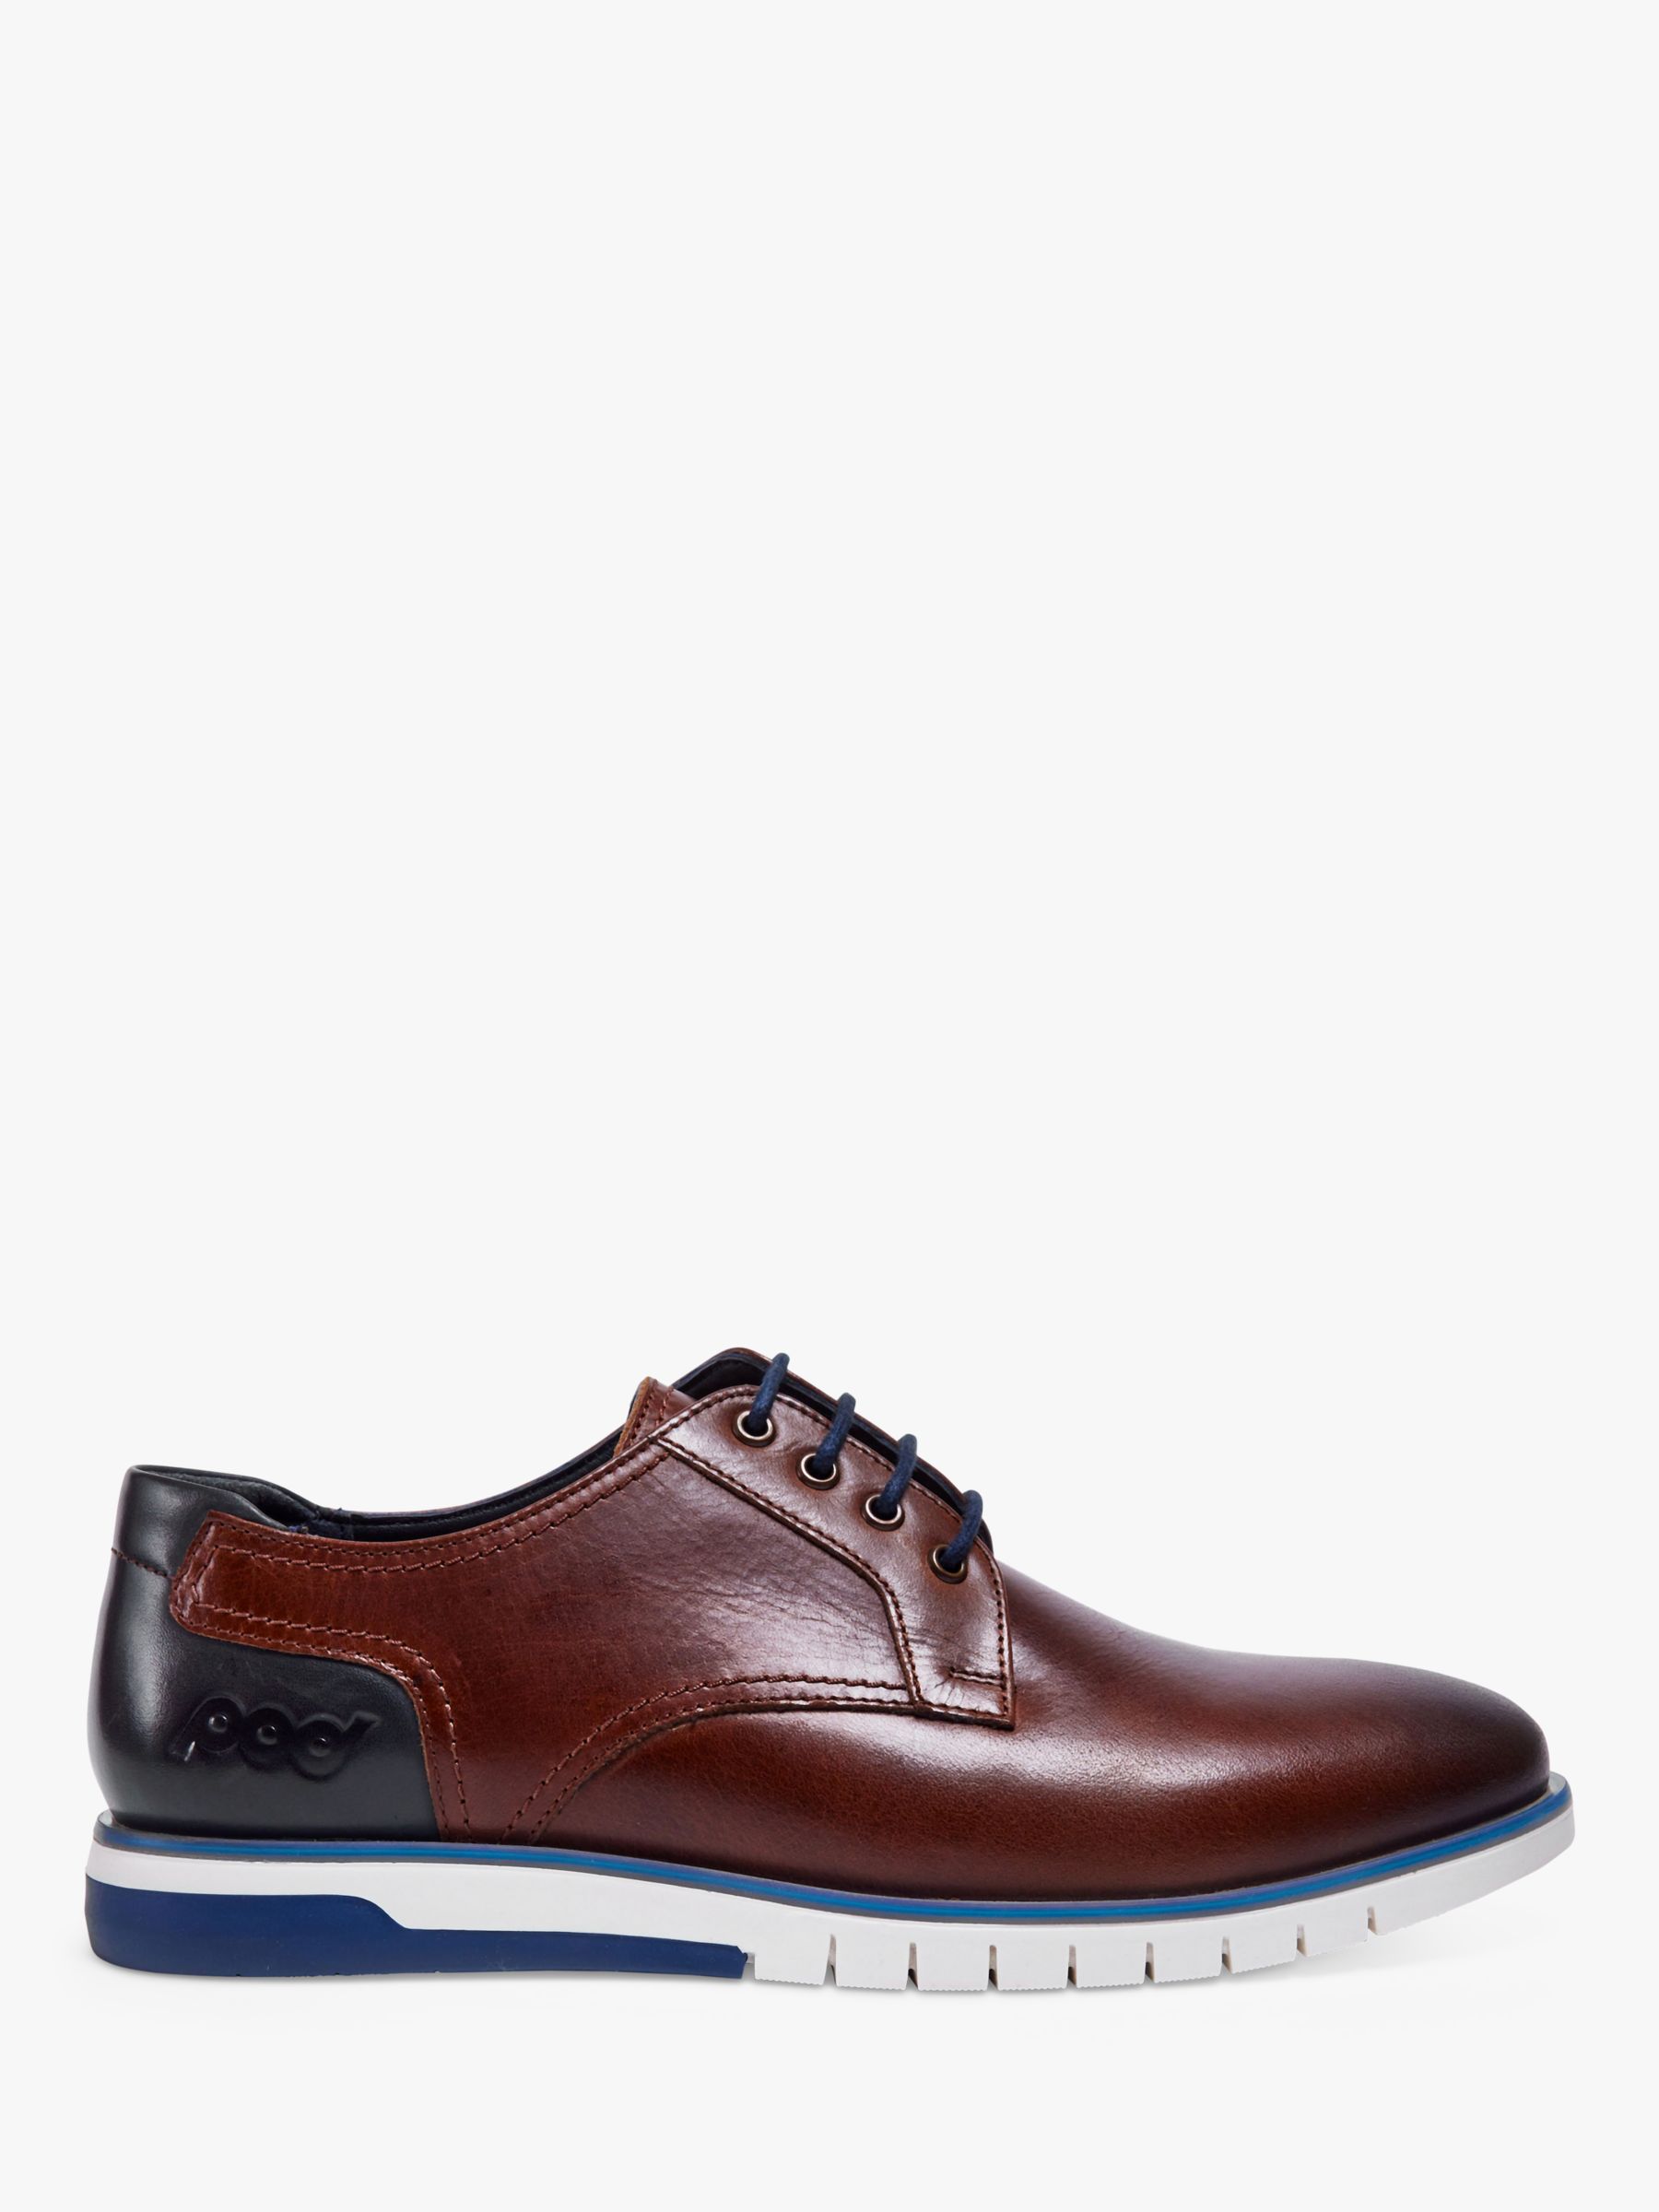 Pod Cillian Casual Leather Shoe, Brown at John Lewis & Partners